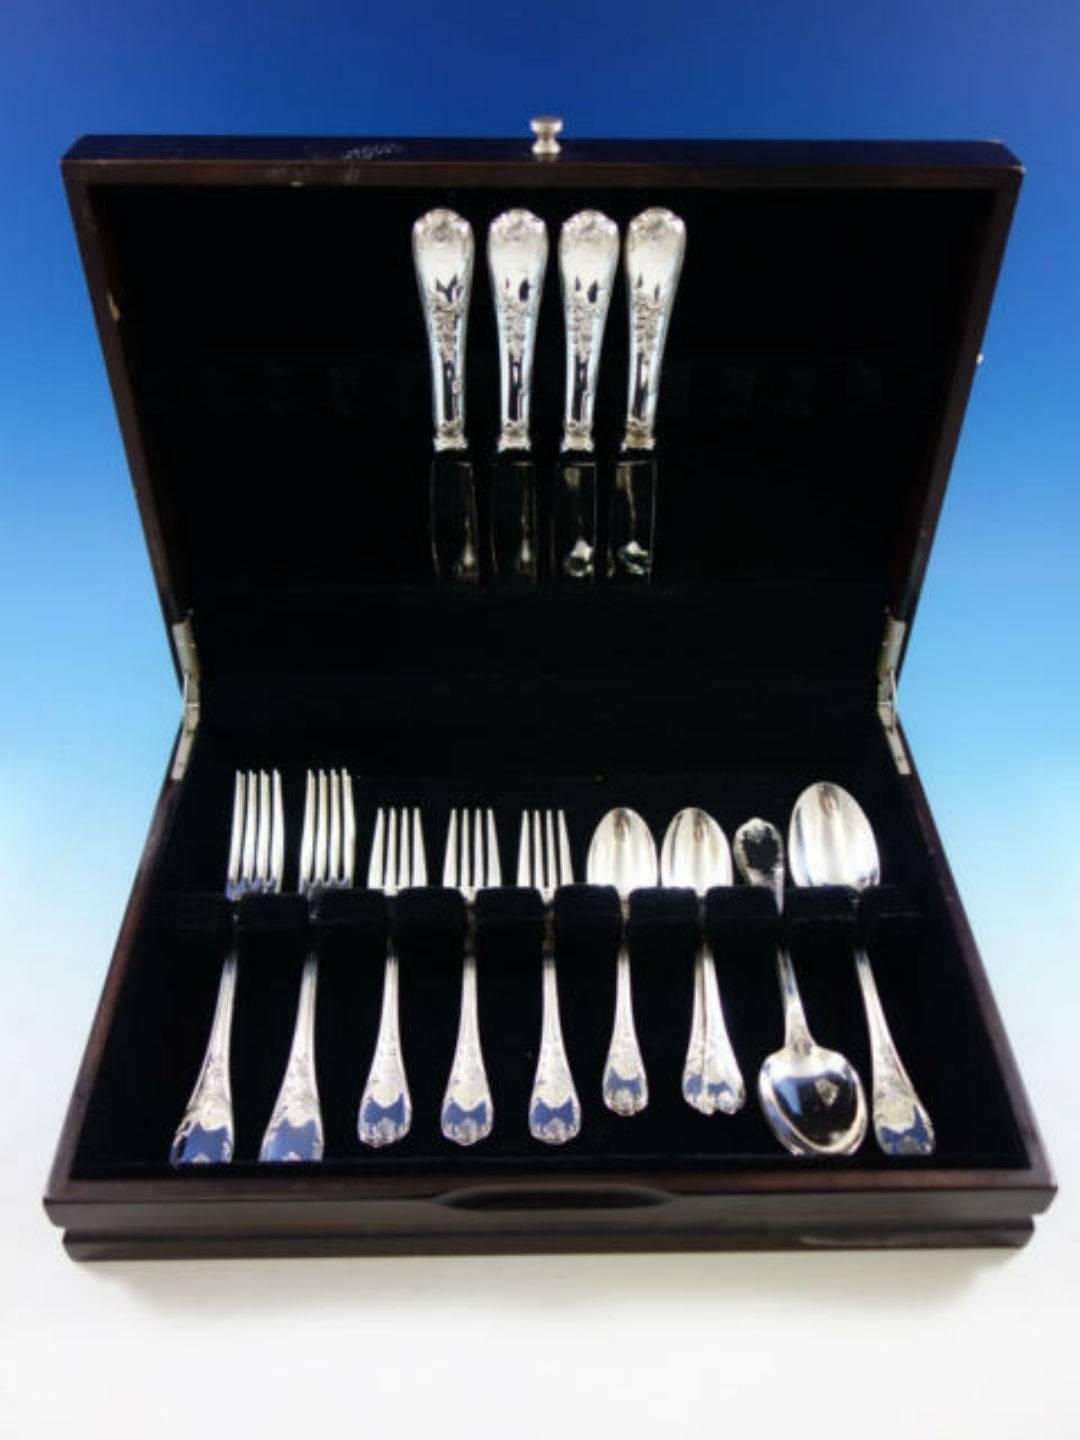 Marly by Christofle France sterling silver flatware set of 20 pieces. Great starter set! This set includes: Four dinner size knives, 9 5/8